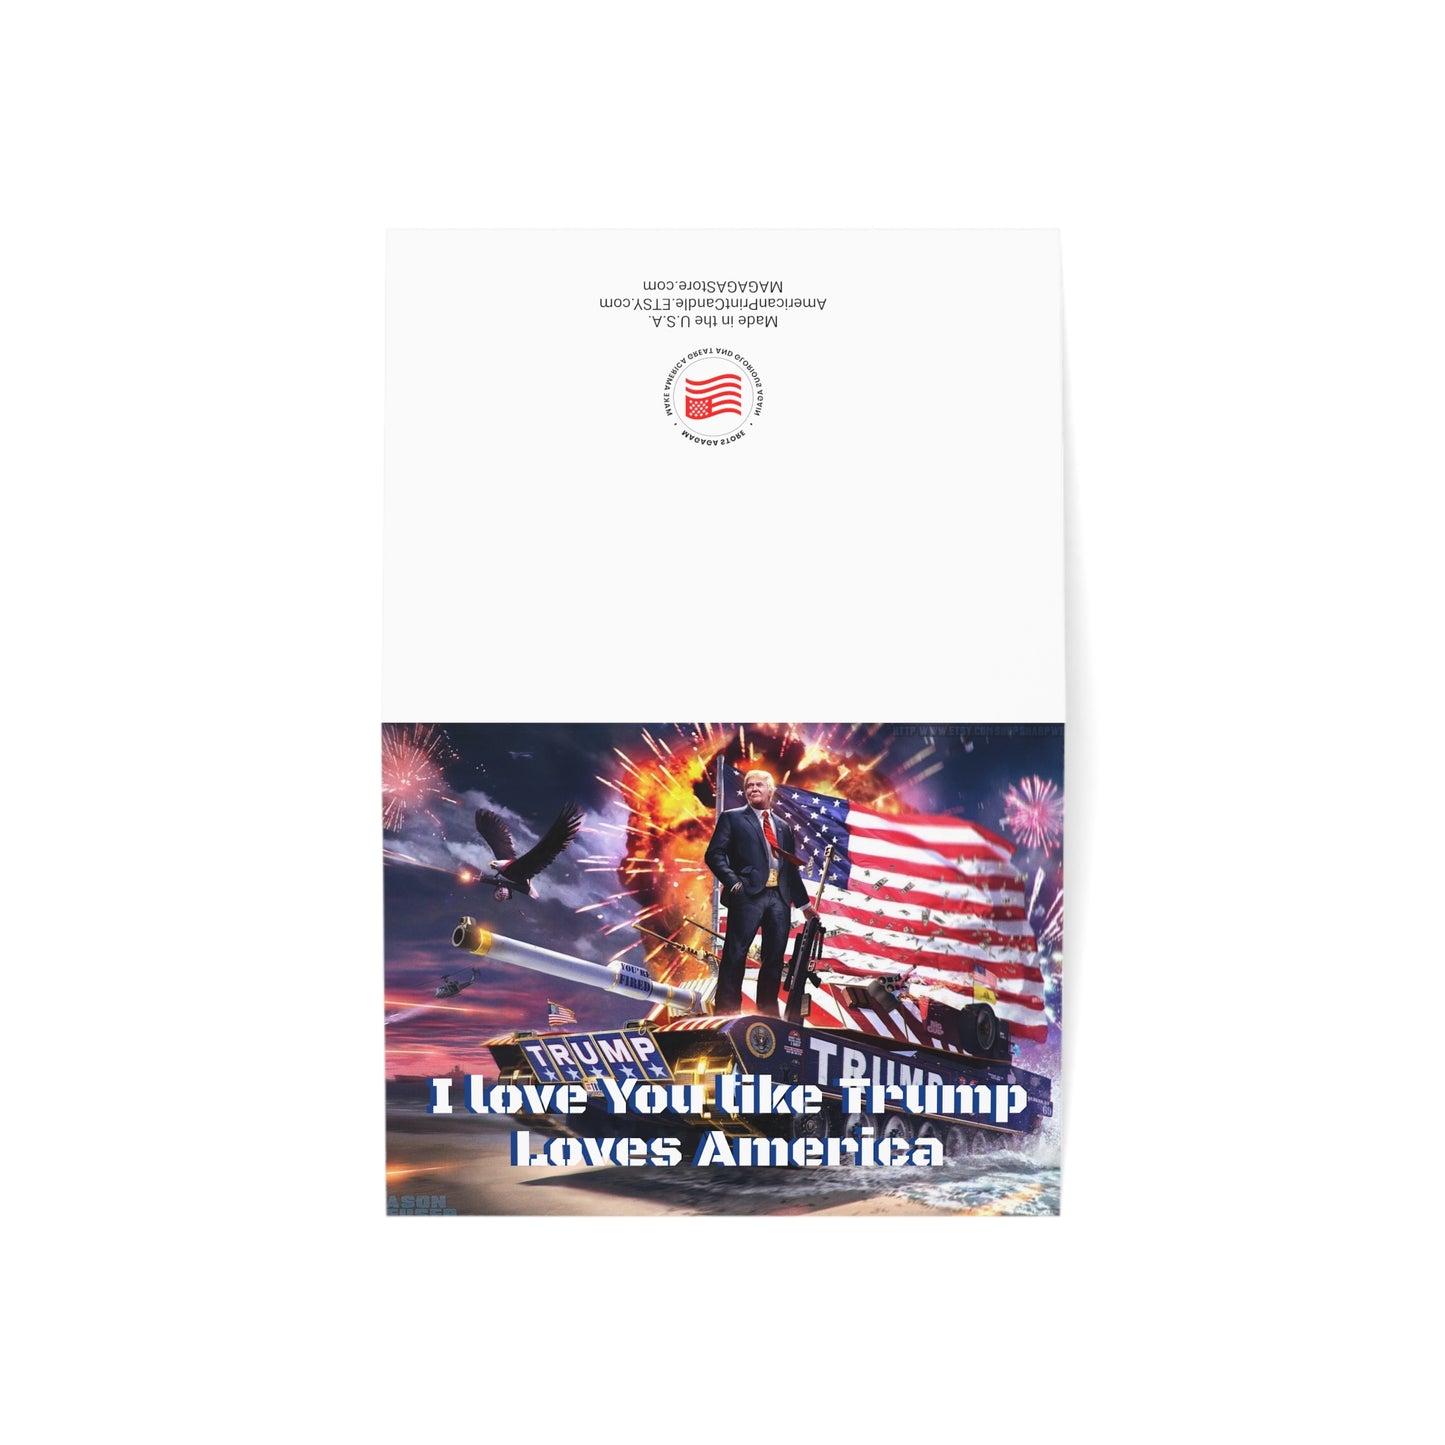 I love you like Trump Loves America MAGA Solider Anniversary Greeting Cards